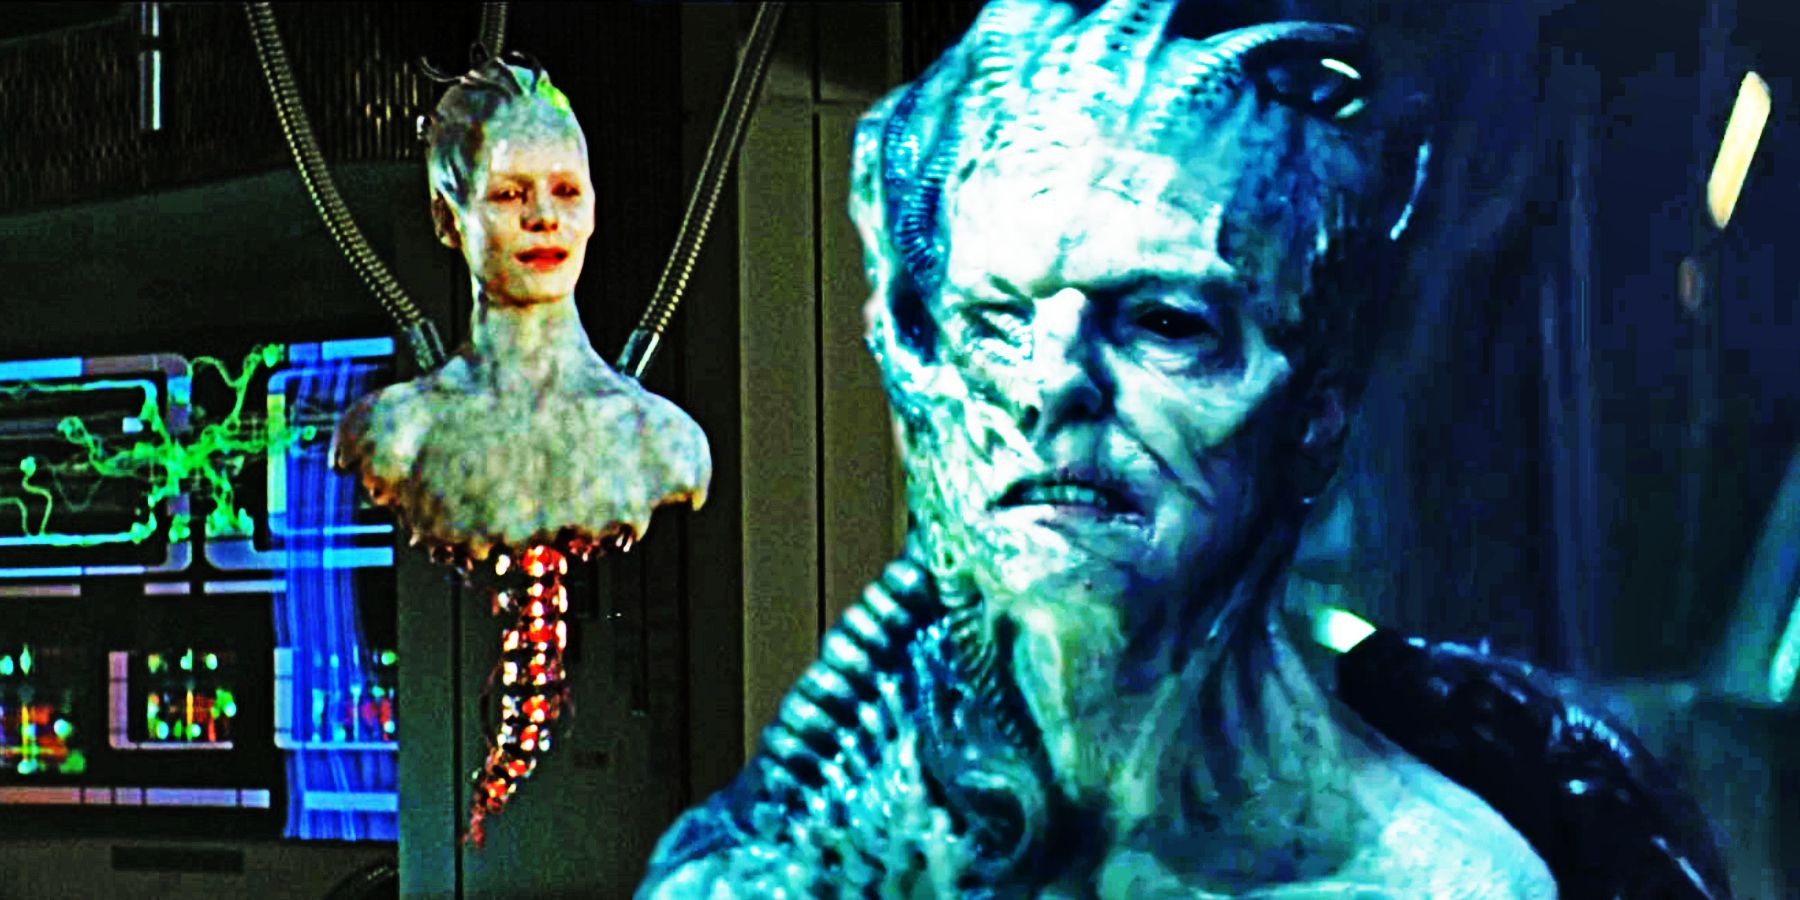 10 Weird Things About The Borg Queen’s Body